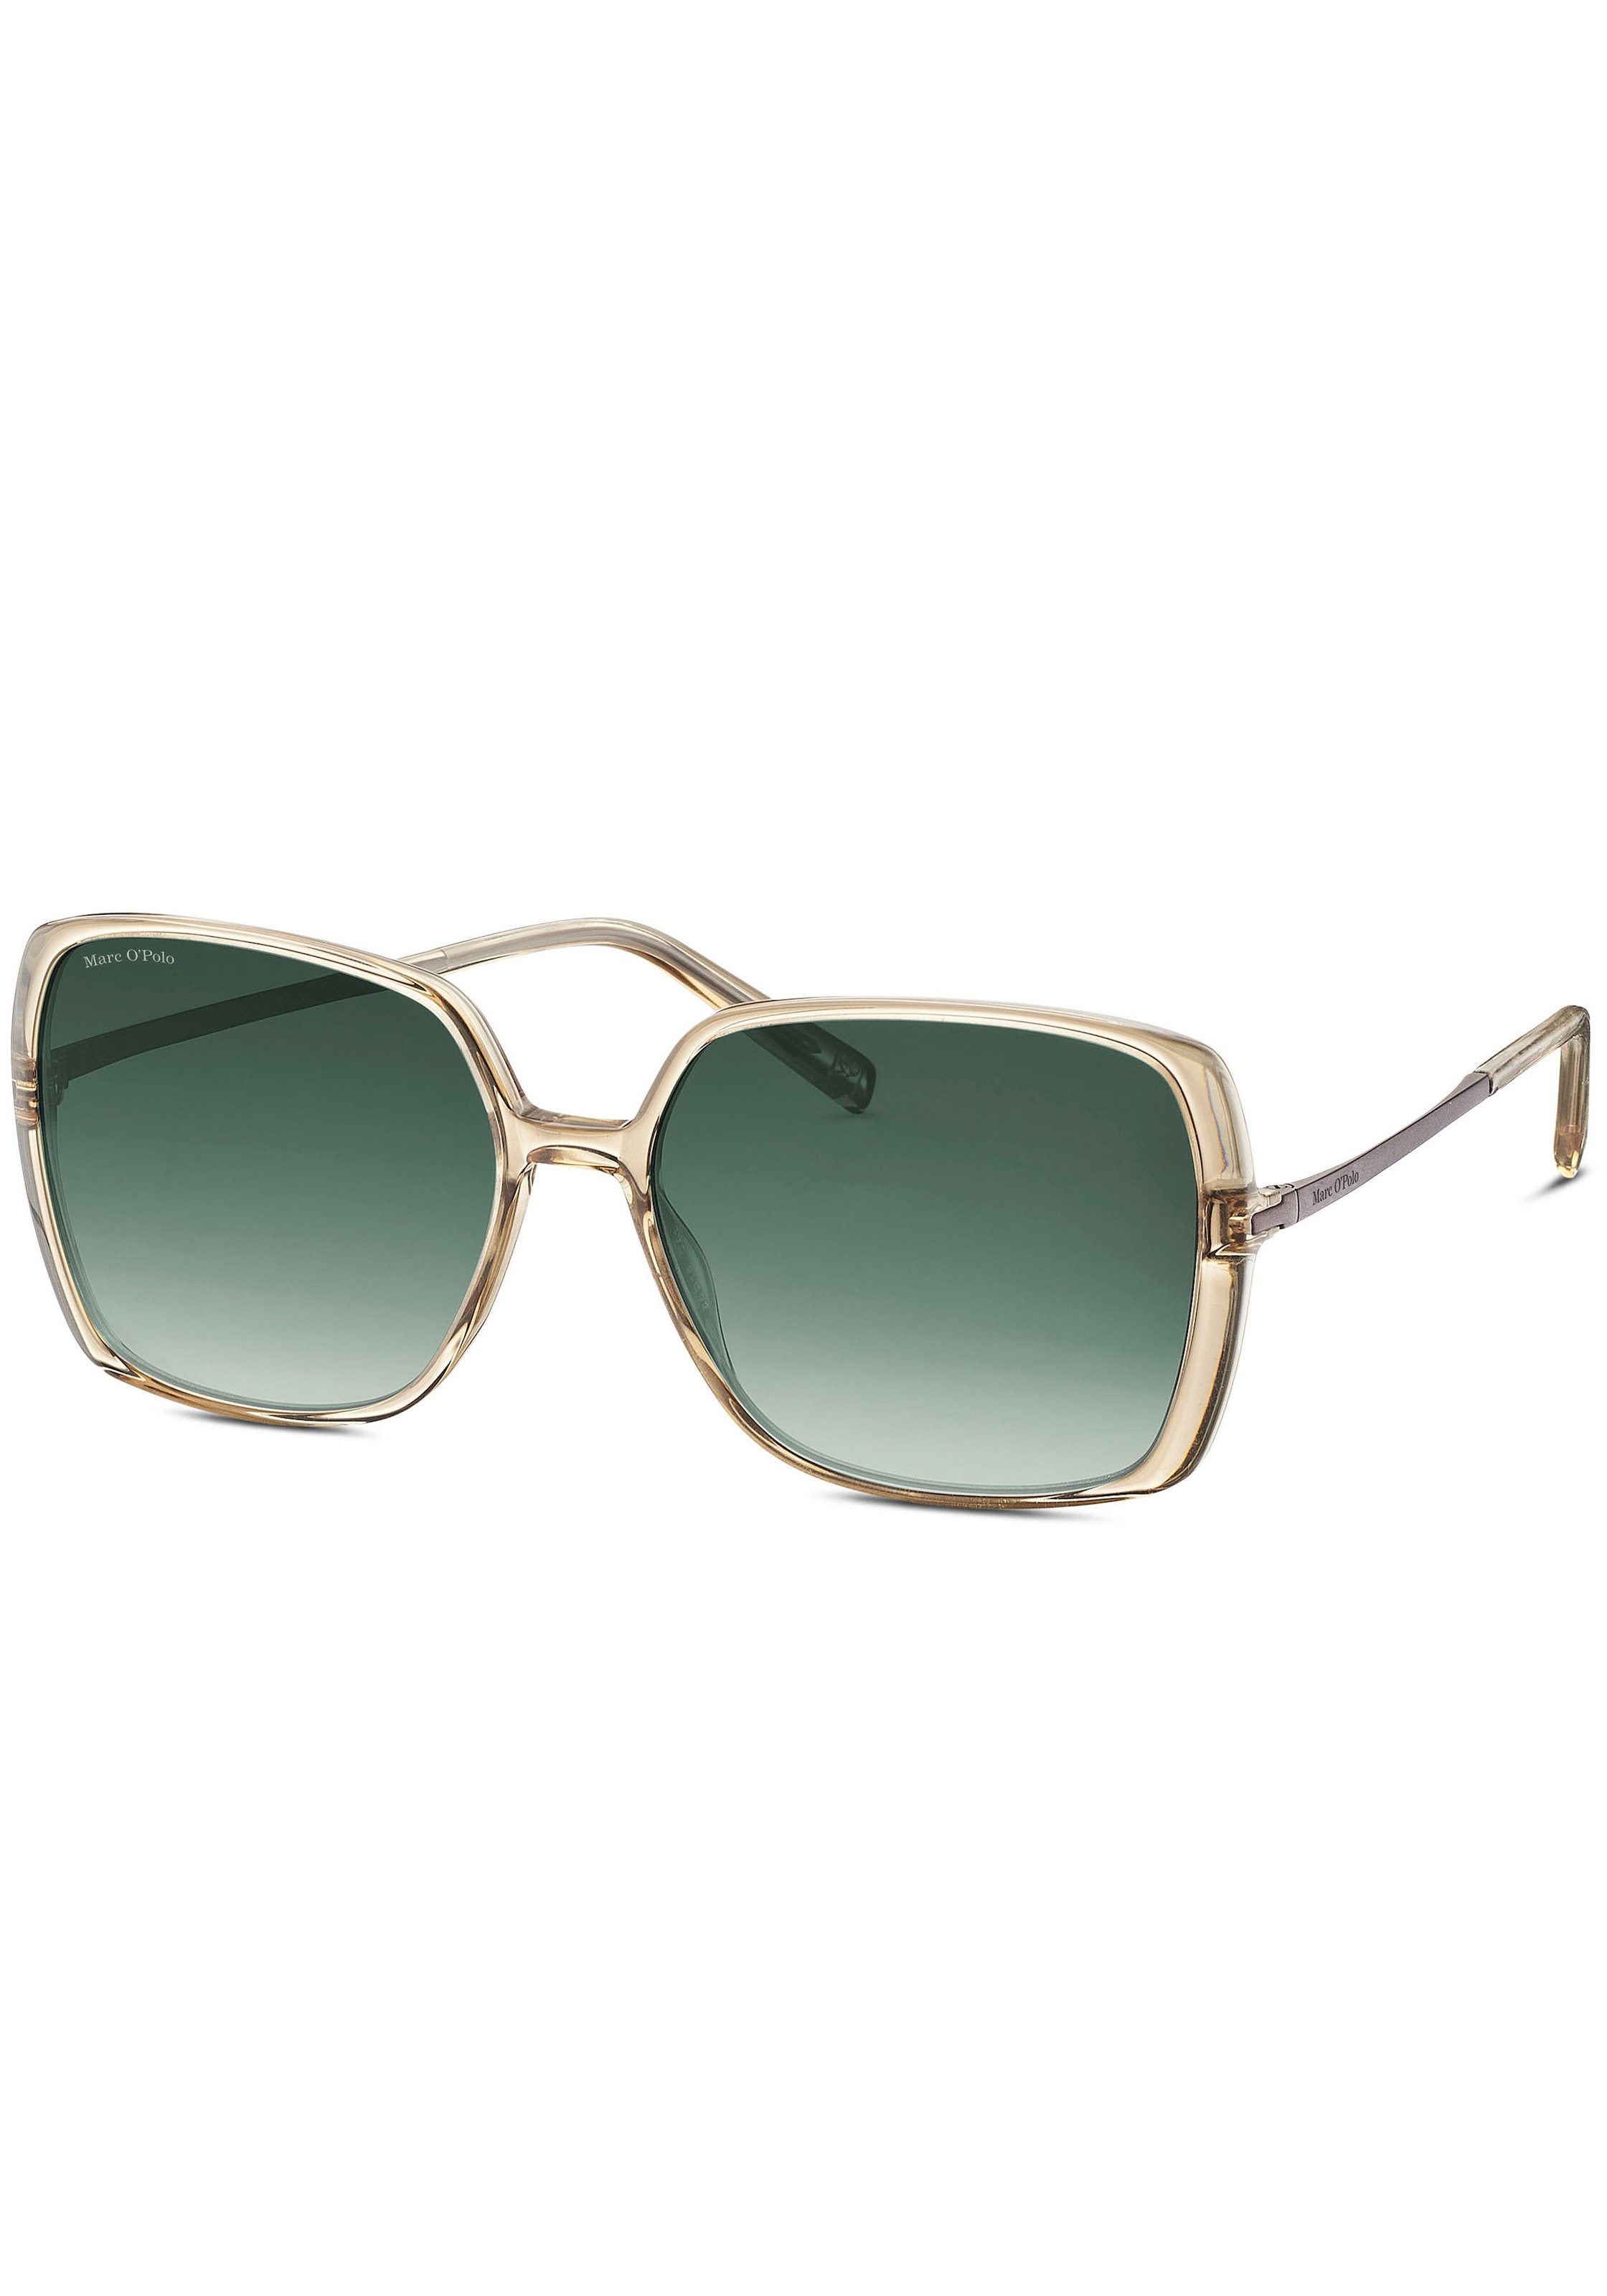 Marc O'Polo Sonnenbrille »Modell 506190«, Karree-From bei OTTO